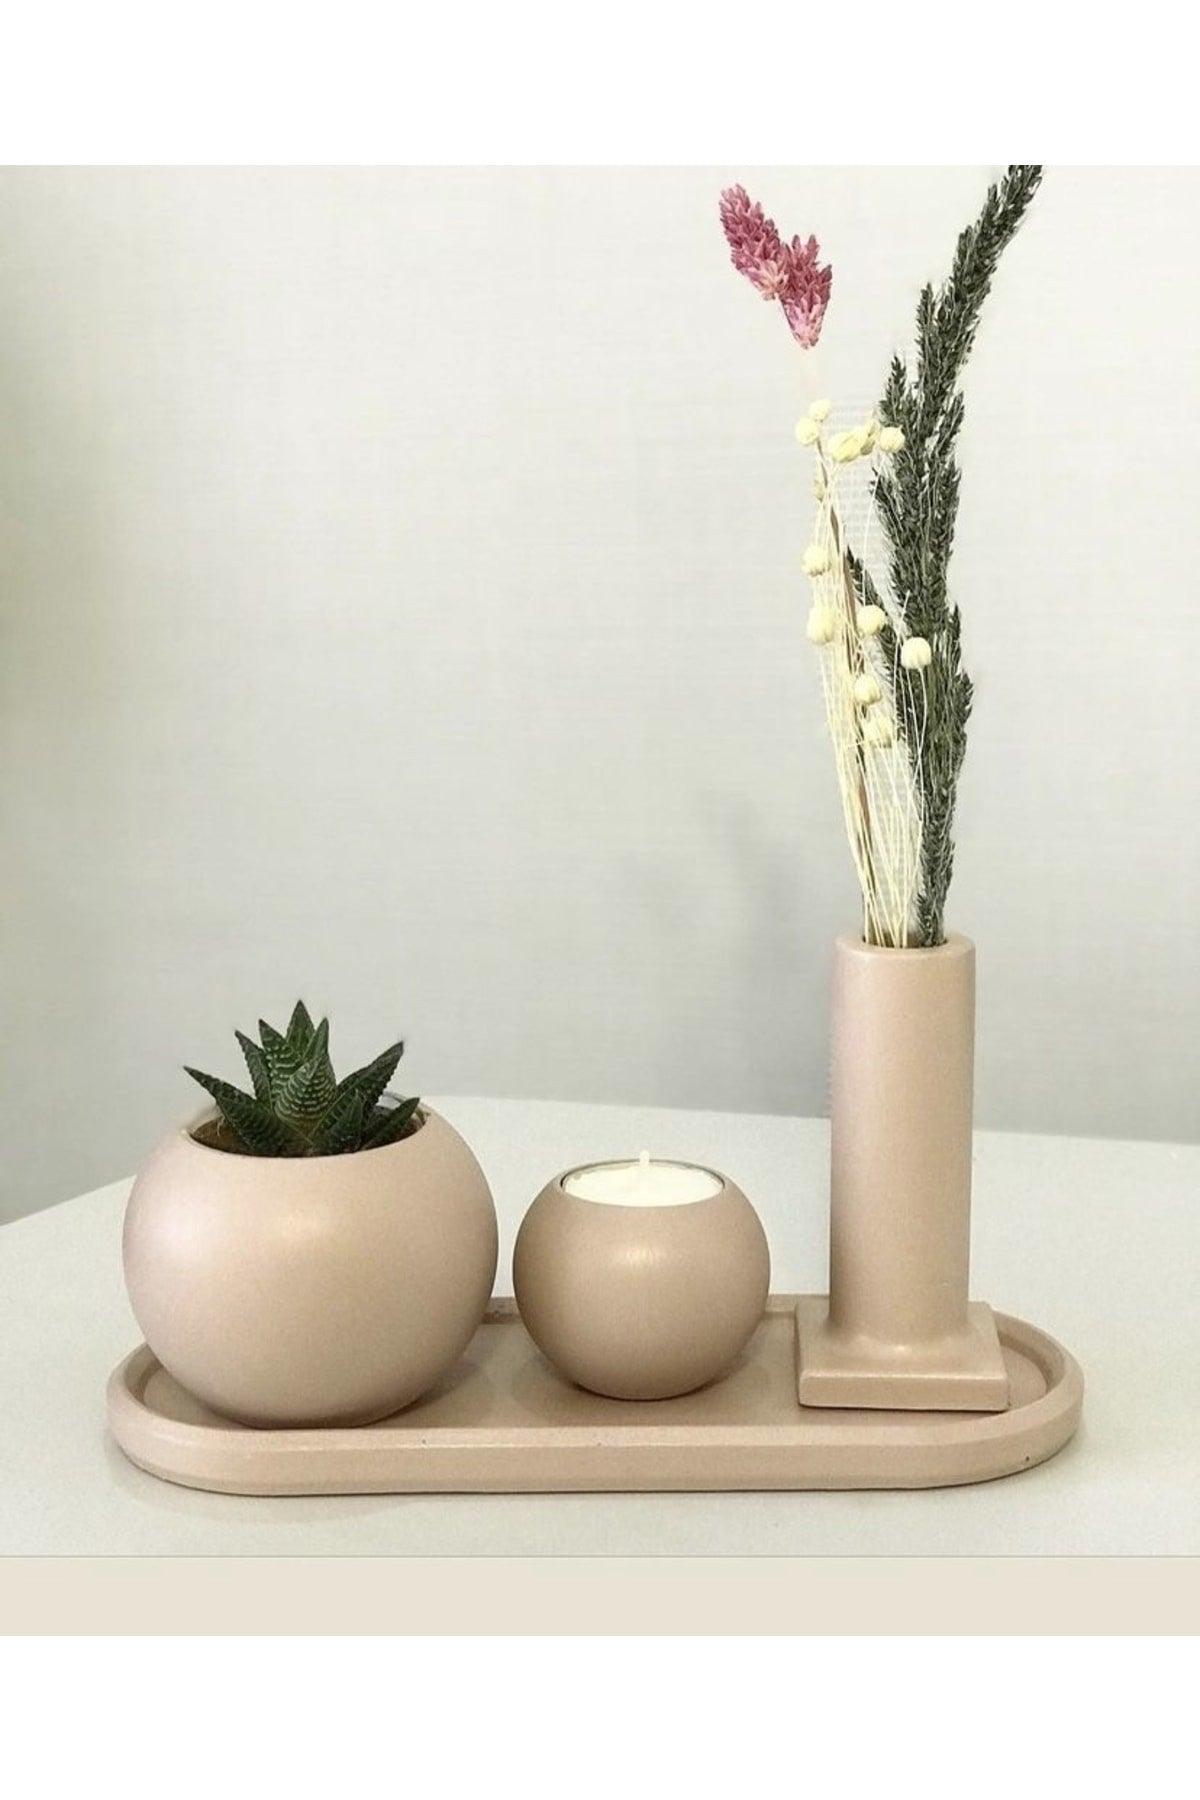 Concrete Tray Flowerpot Candle Holder And Candlestick Set - Swordslife